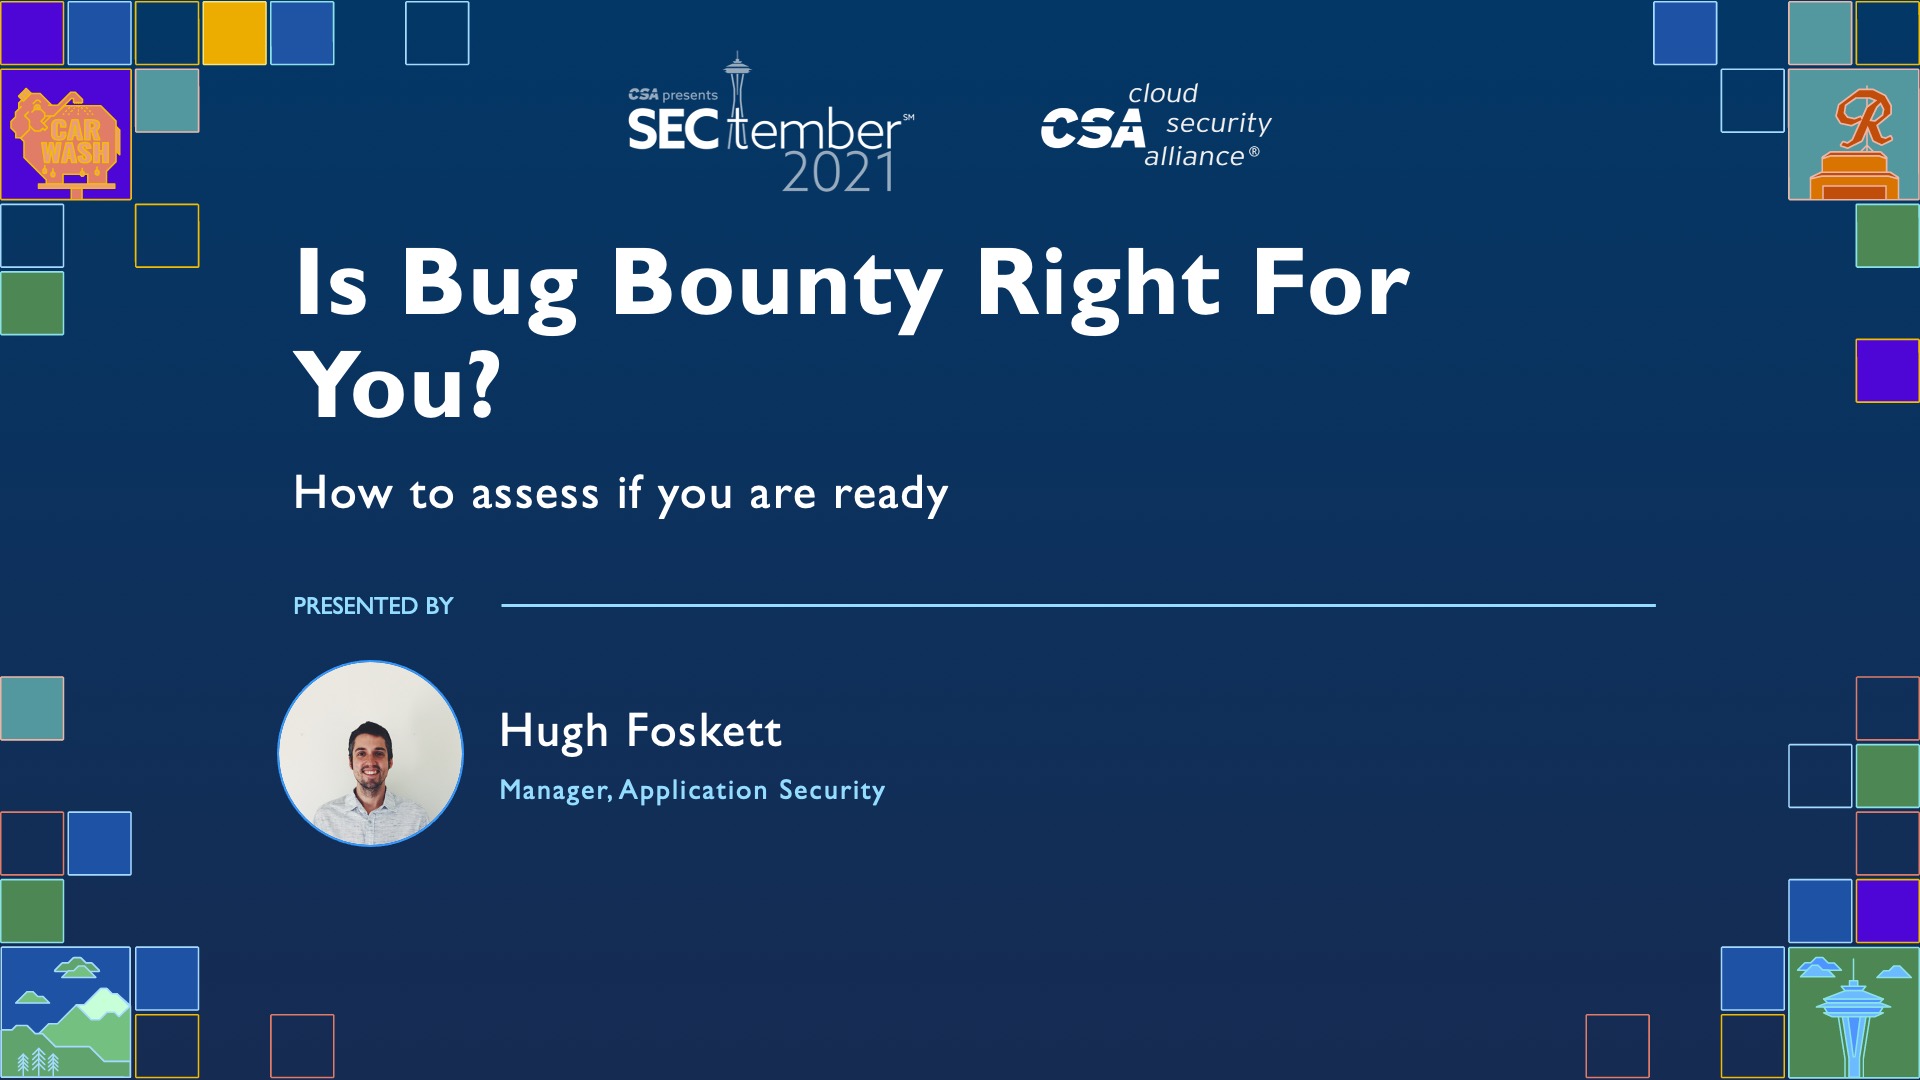 Is Bug Bounty Right For You?